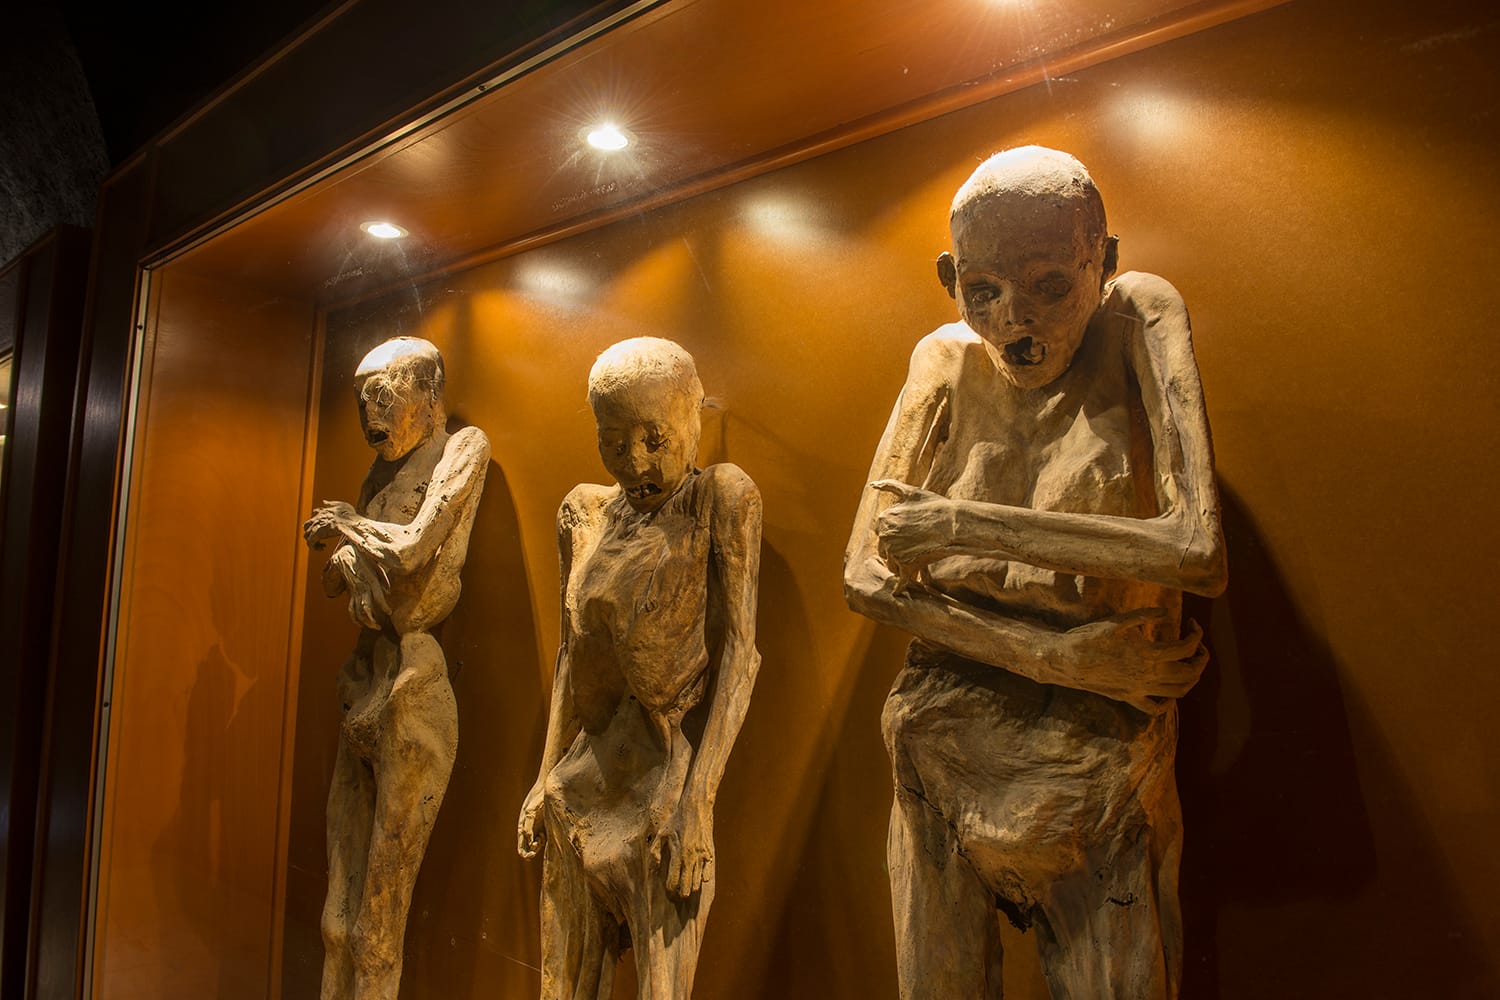 Museum of the Mummies in Guanajuato, Mexico